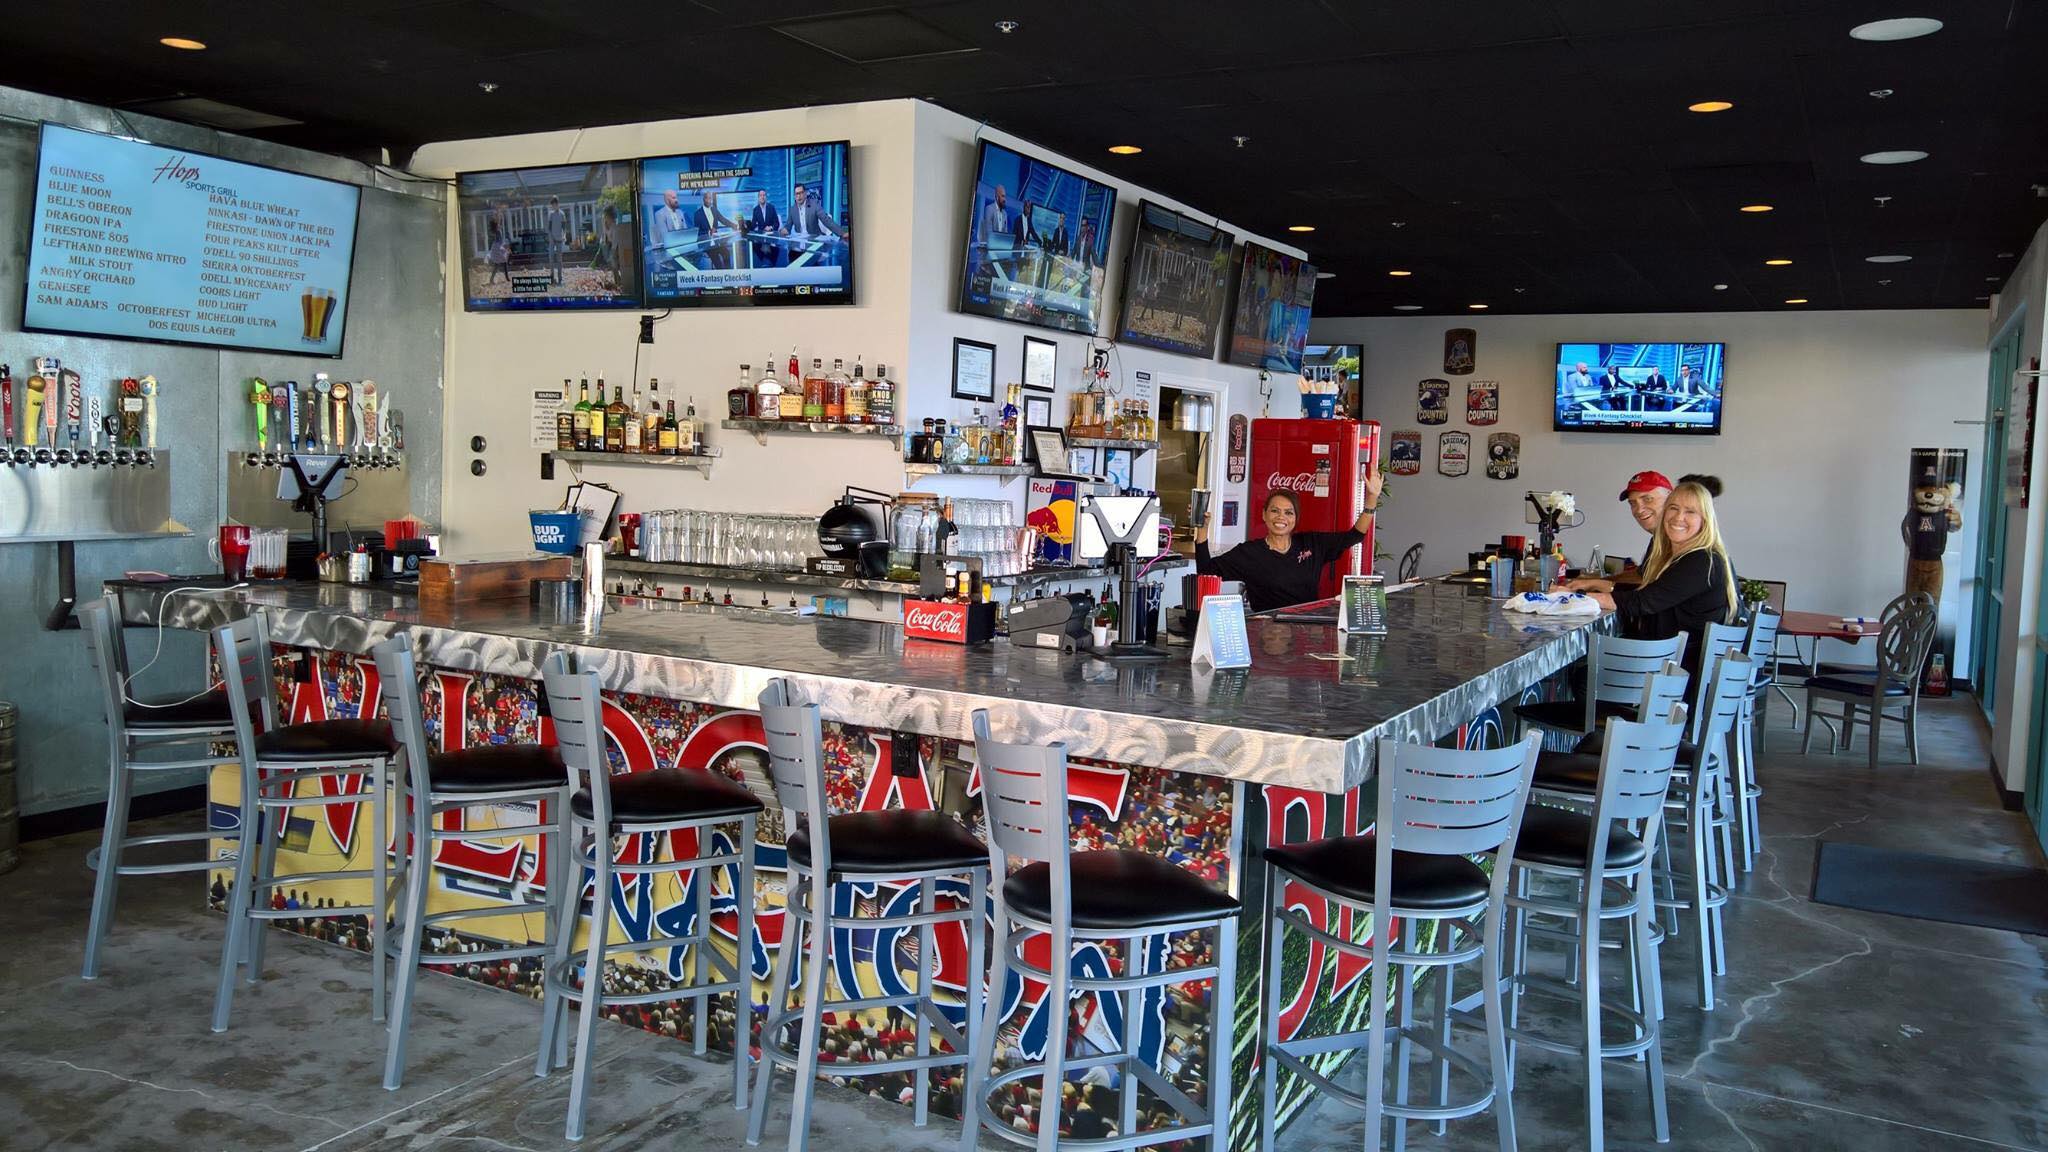 Hops Sports Grill interior (Photo courtesy of Hops Sports Grill on Facebook)